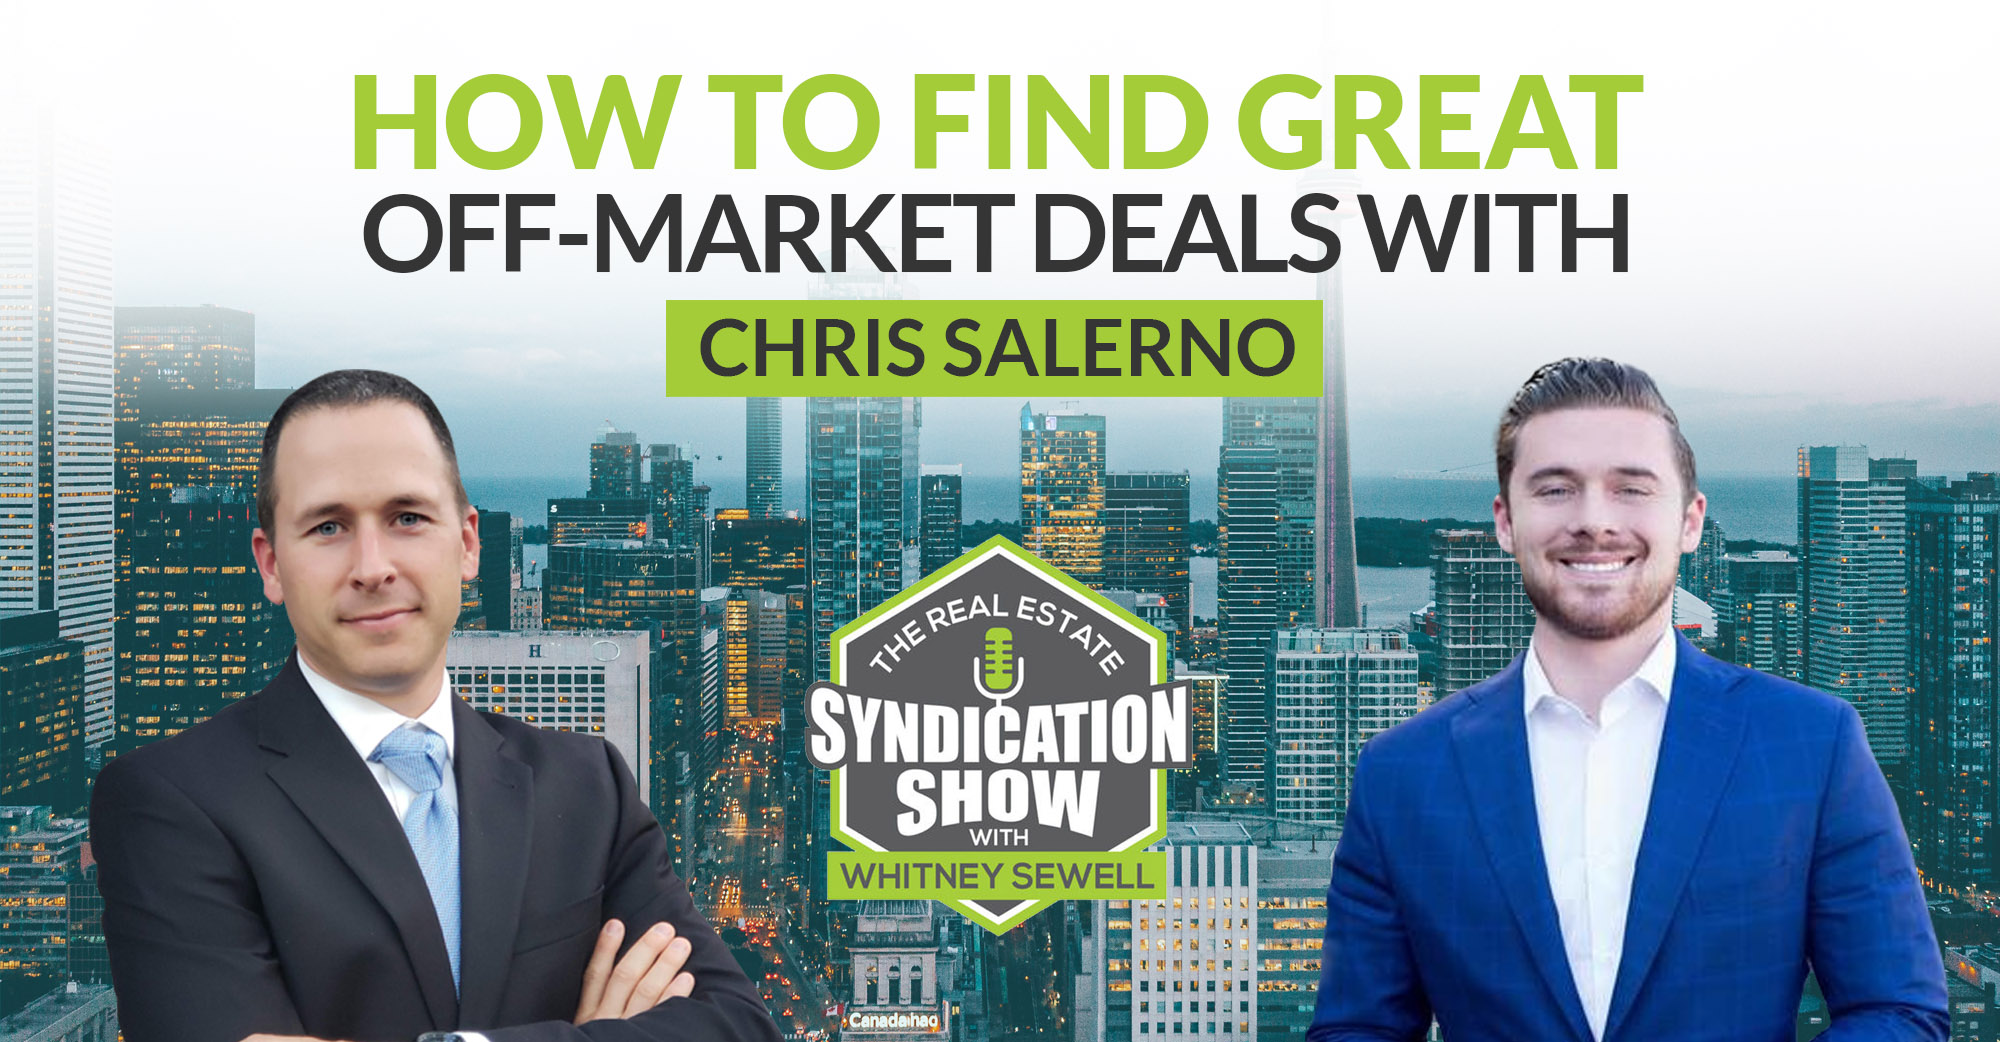 How to Find Great Off-Market Deals with Chris Salerno